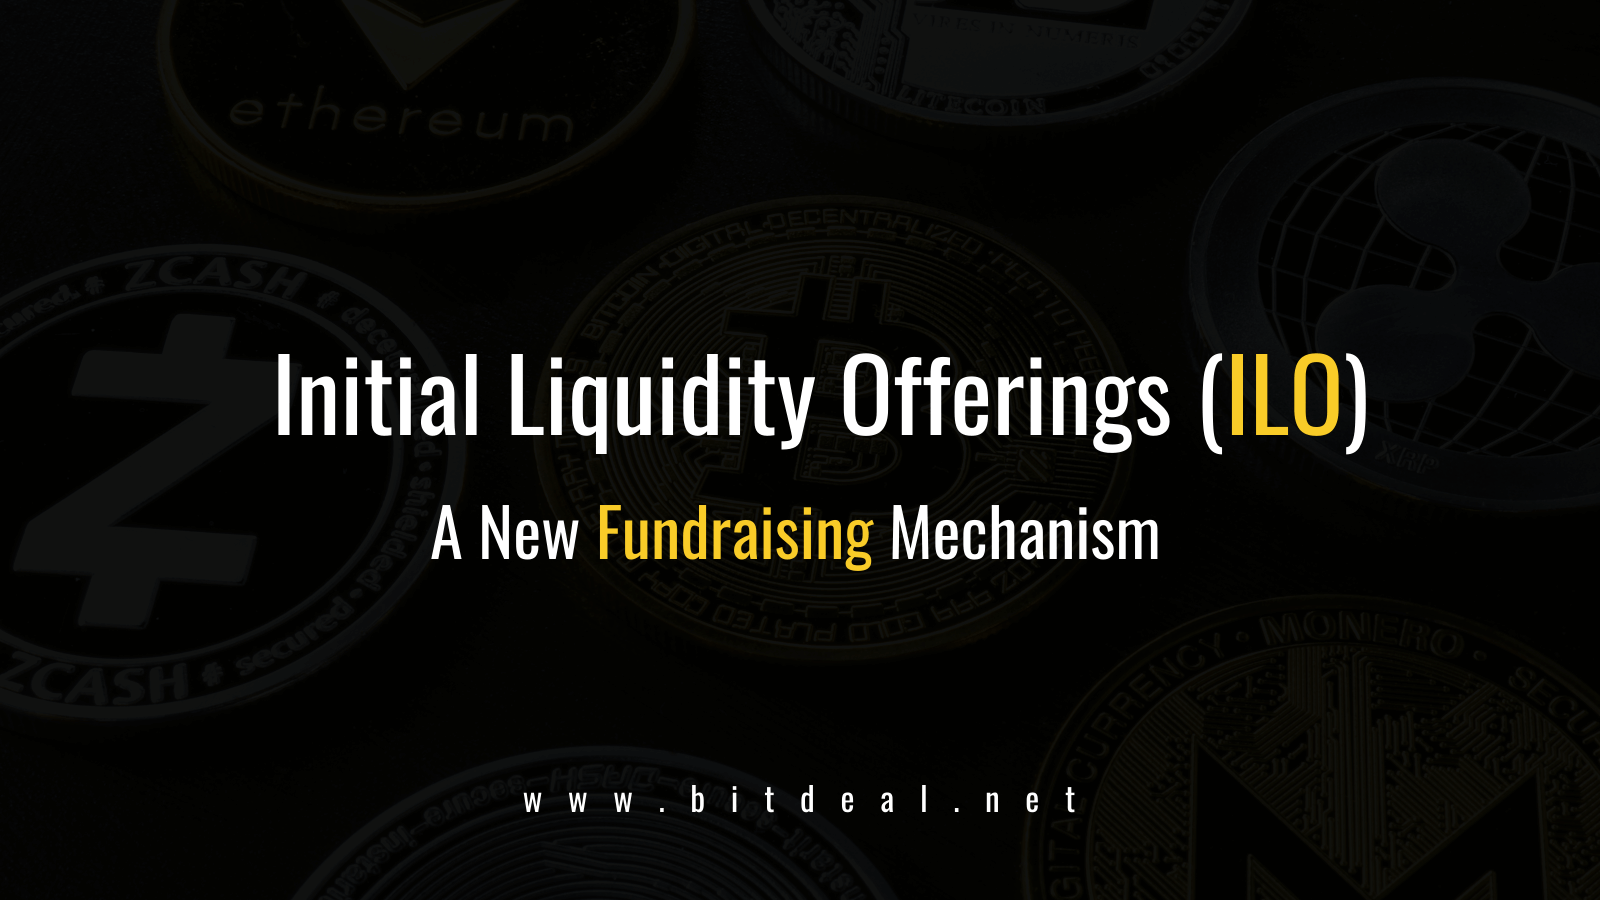 Initial Liquidity Offering - A New Fundraising Mechanism